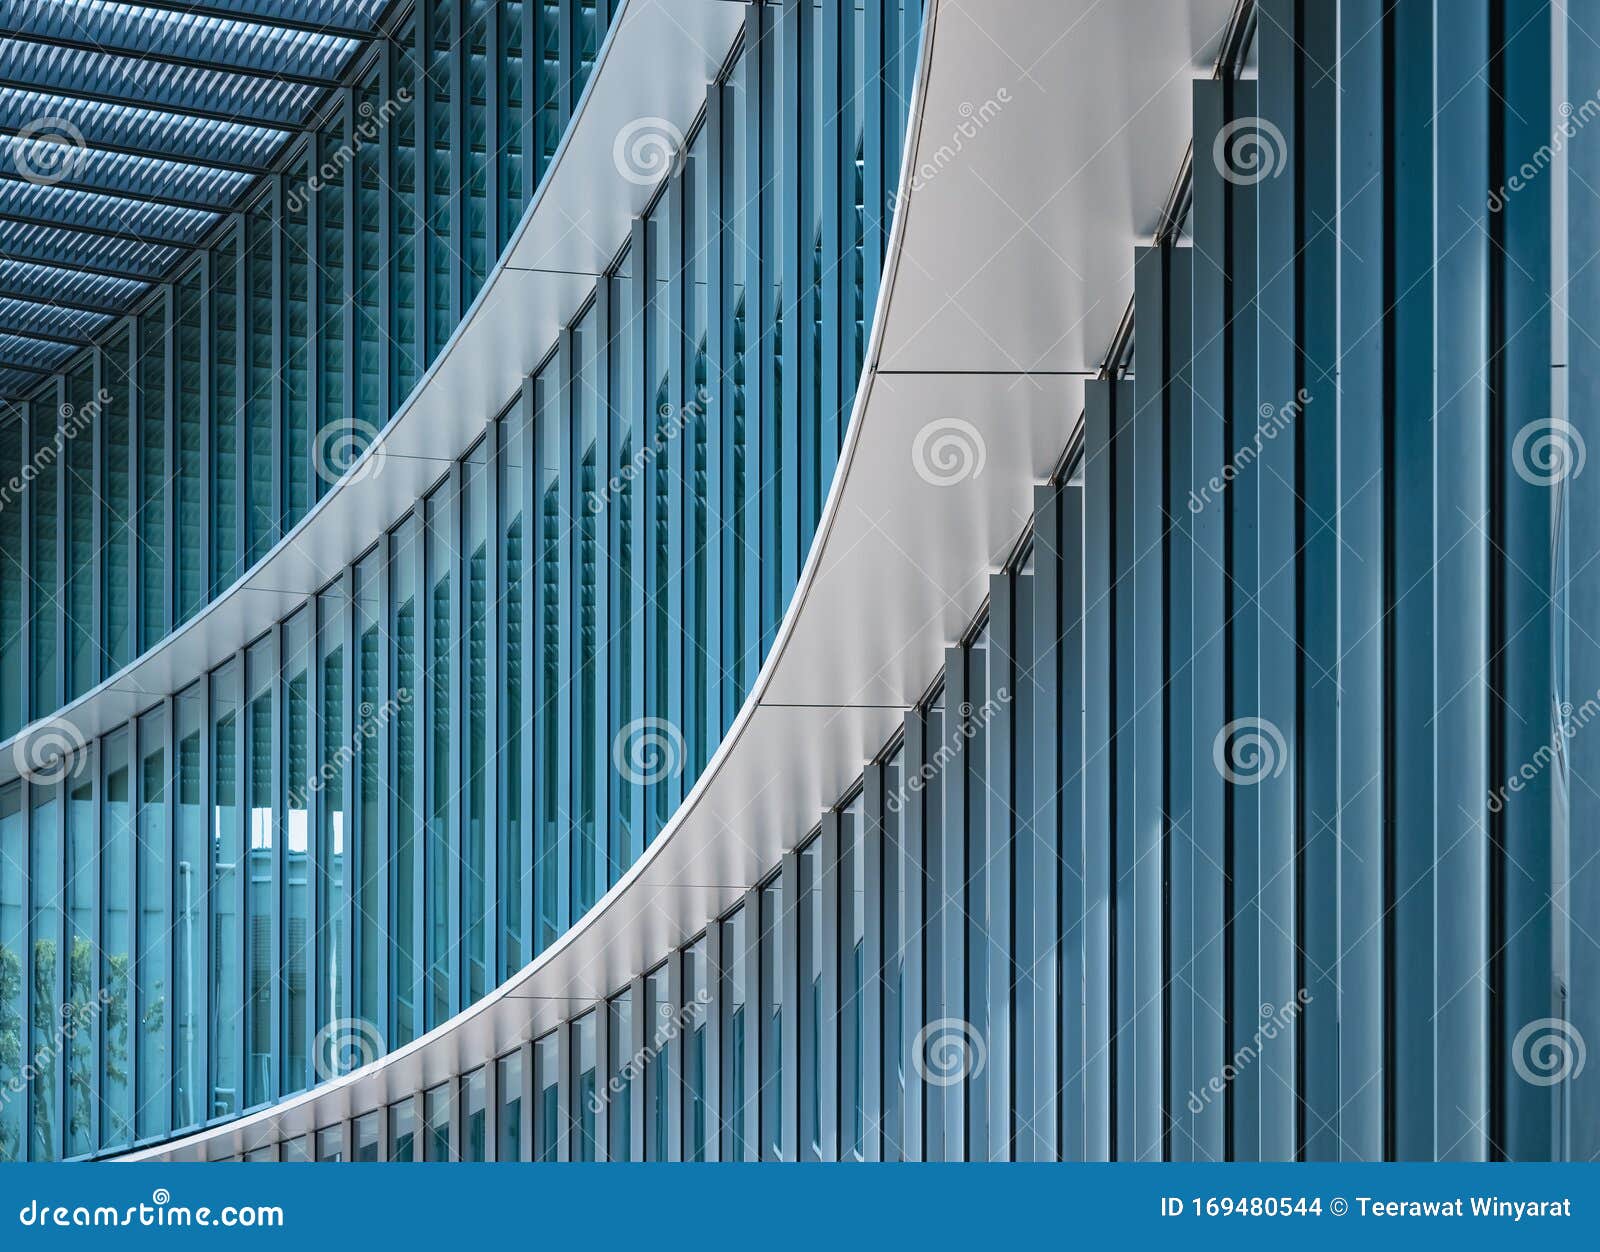 architecture detail modern building glass wall n curve pattern